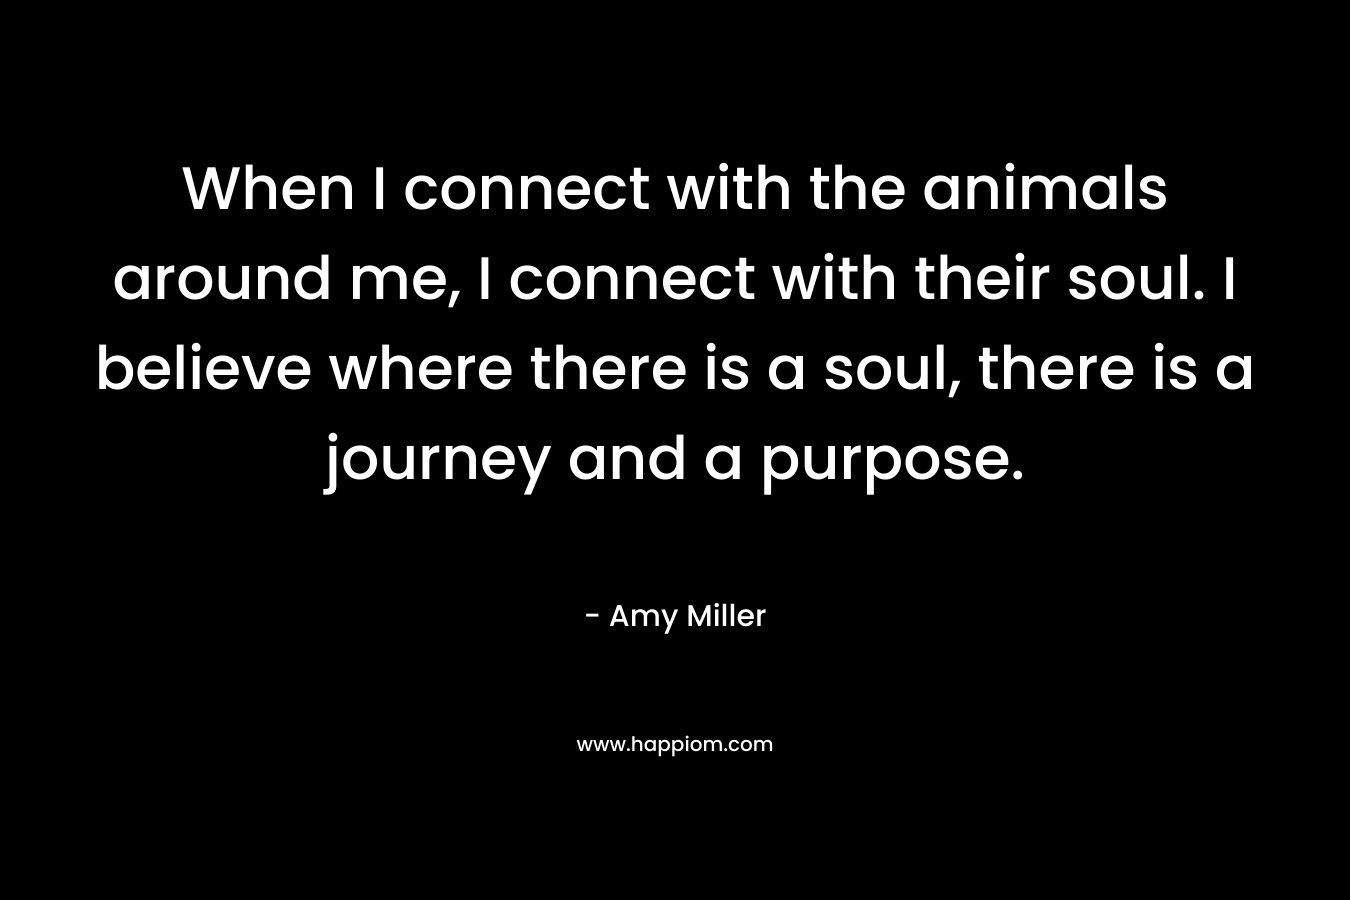 When I connect with the animals around me, I connect with their soul. I believe where there is a soul, there is a journey and a purpose.